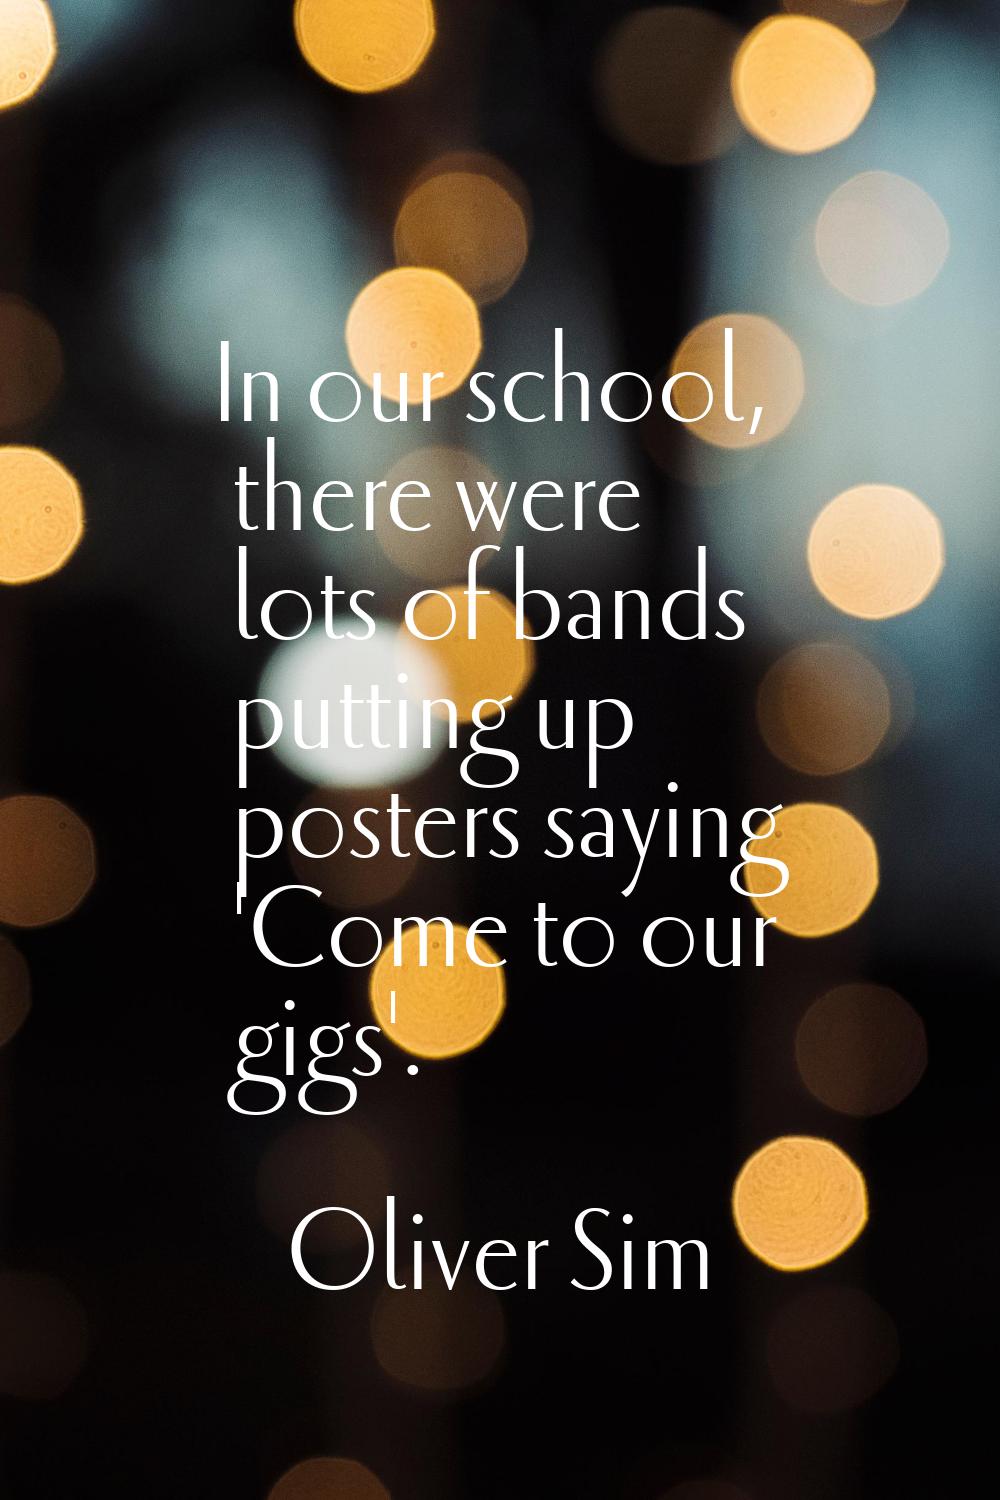 In our school, there were lots of bands putting up posters saying 'Come to our gigs'.